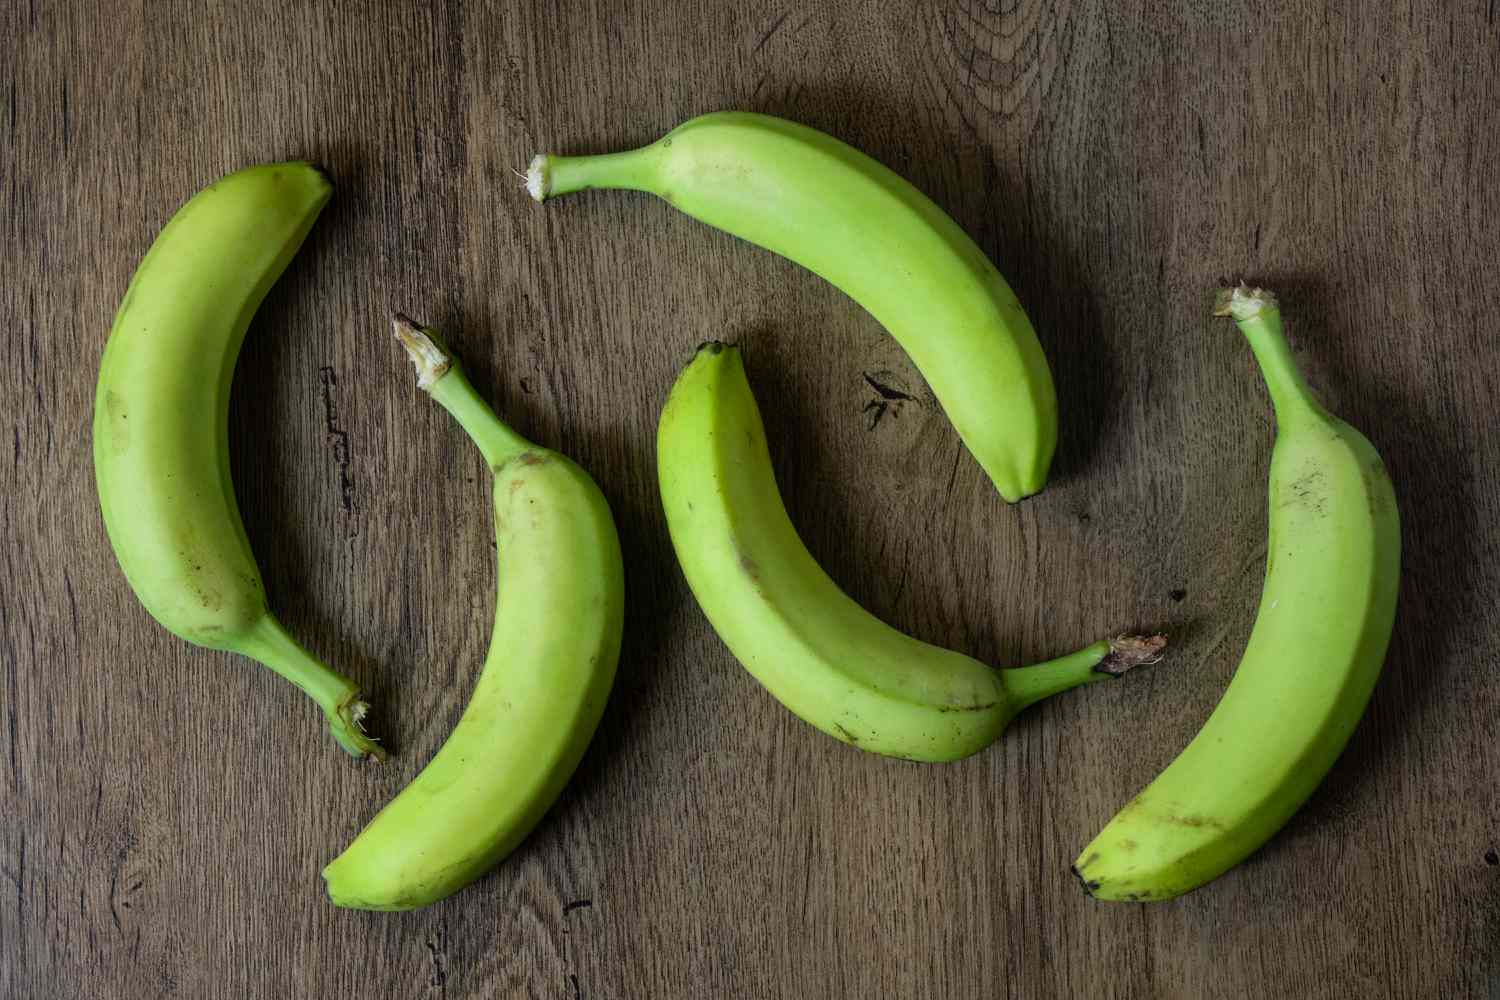 how-to-boil-green-bananas